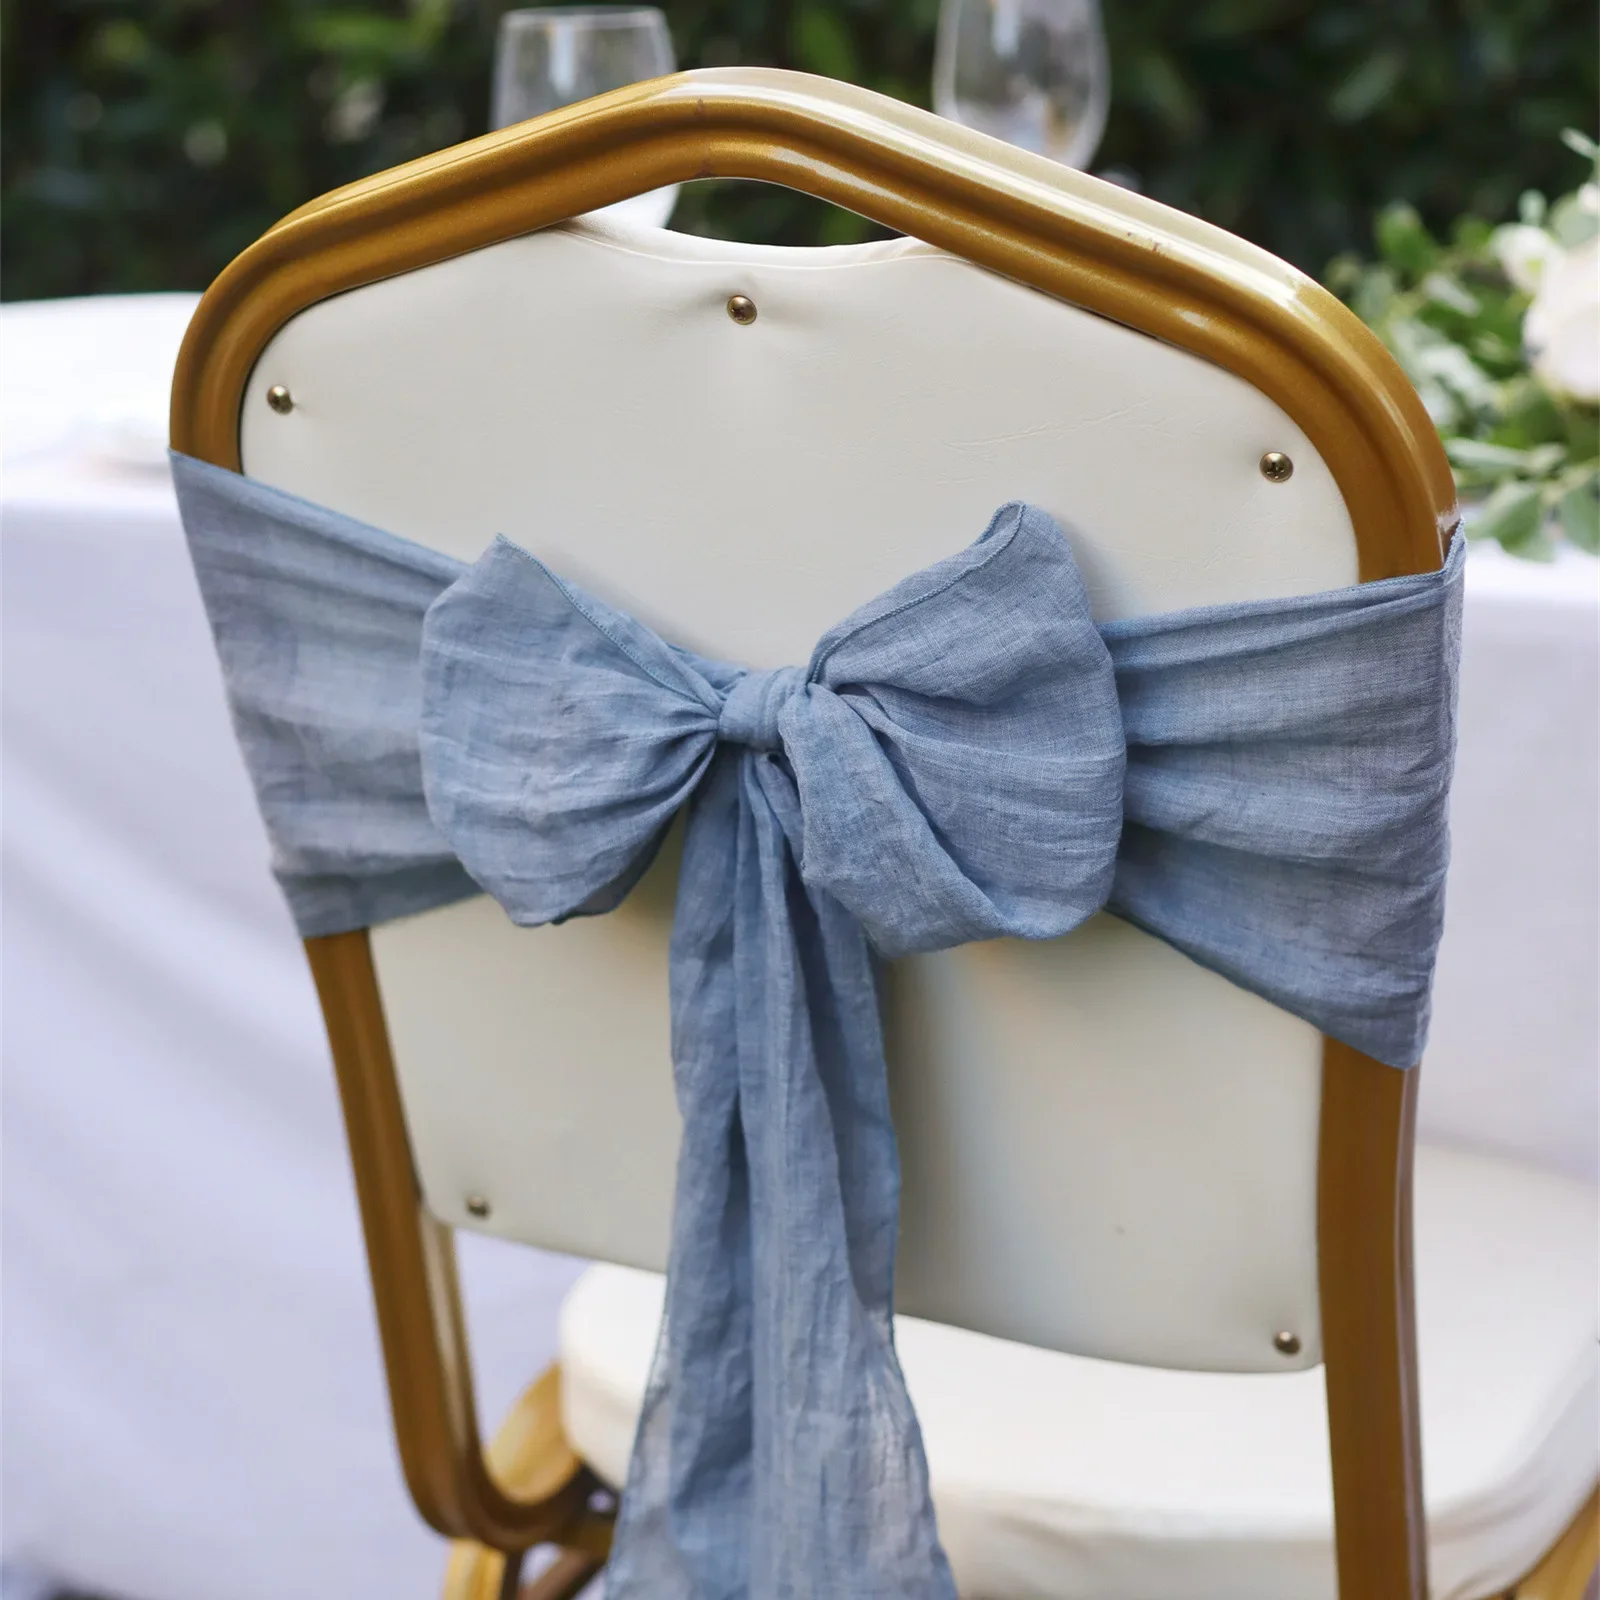 

24pcs Chair Sashes Bows Universal Chair Cover For Wedding Reception Restaurant Event Decoration Banquet,Party,Hotel Event Decor